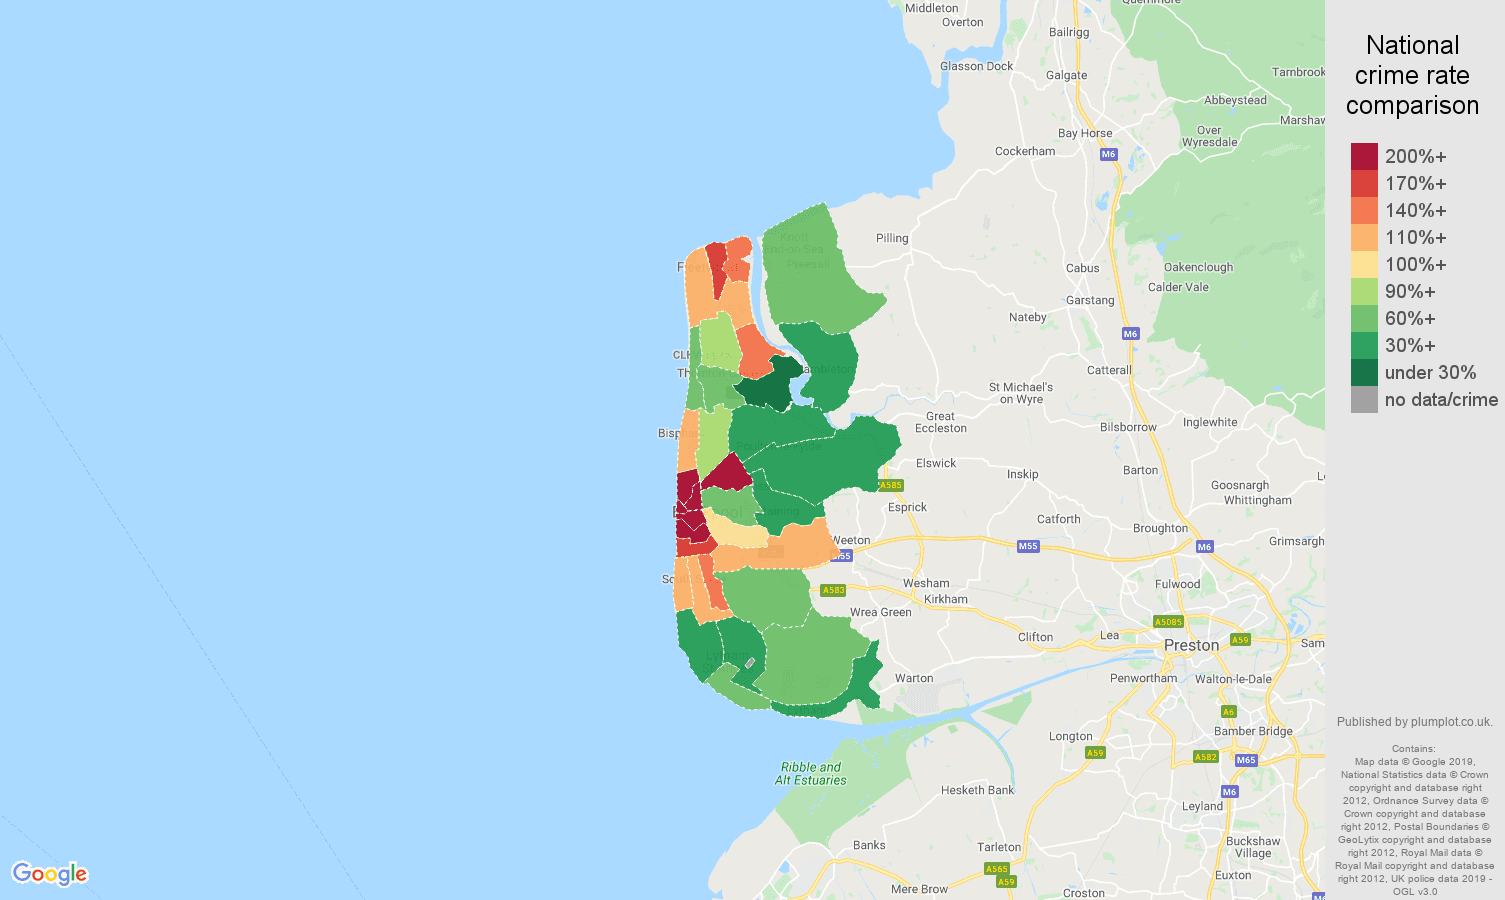 Blackpool other crime rate comparison map